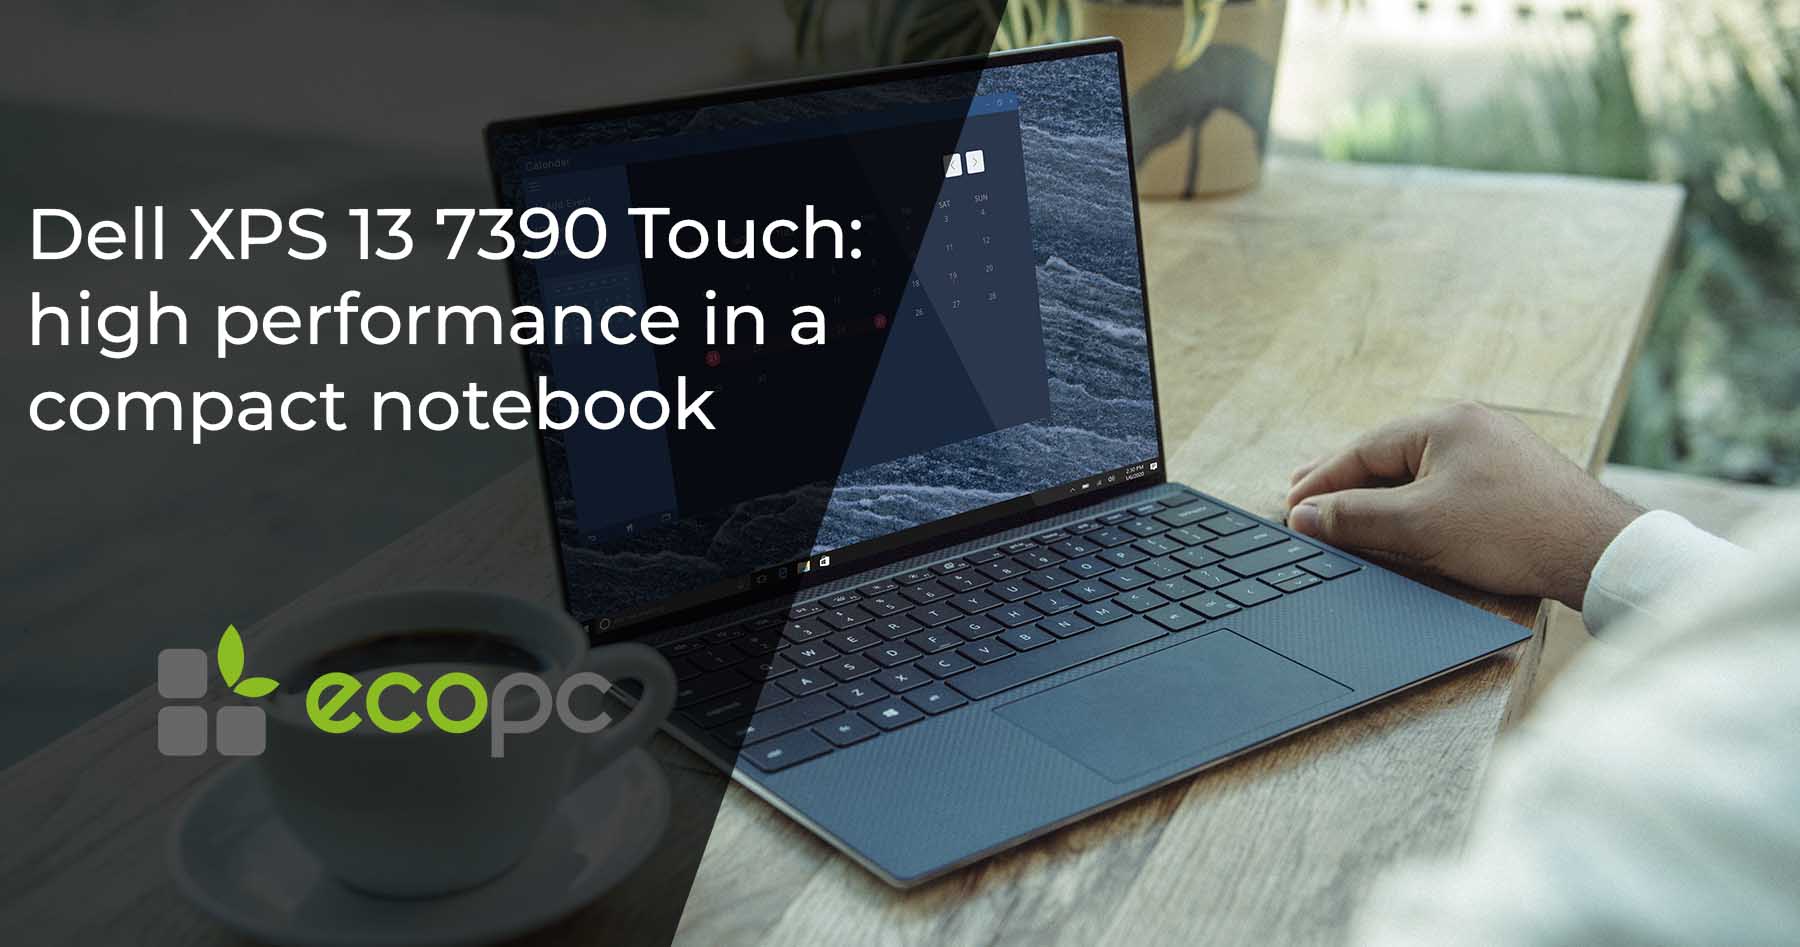 Dell XPS 13 7390 Touch: high performance in a compact notebook